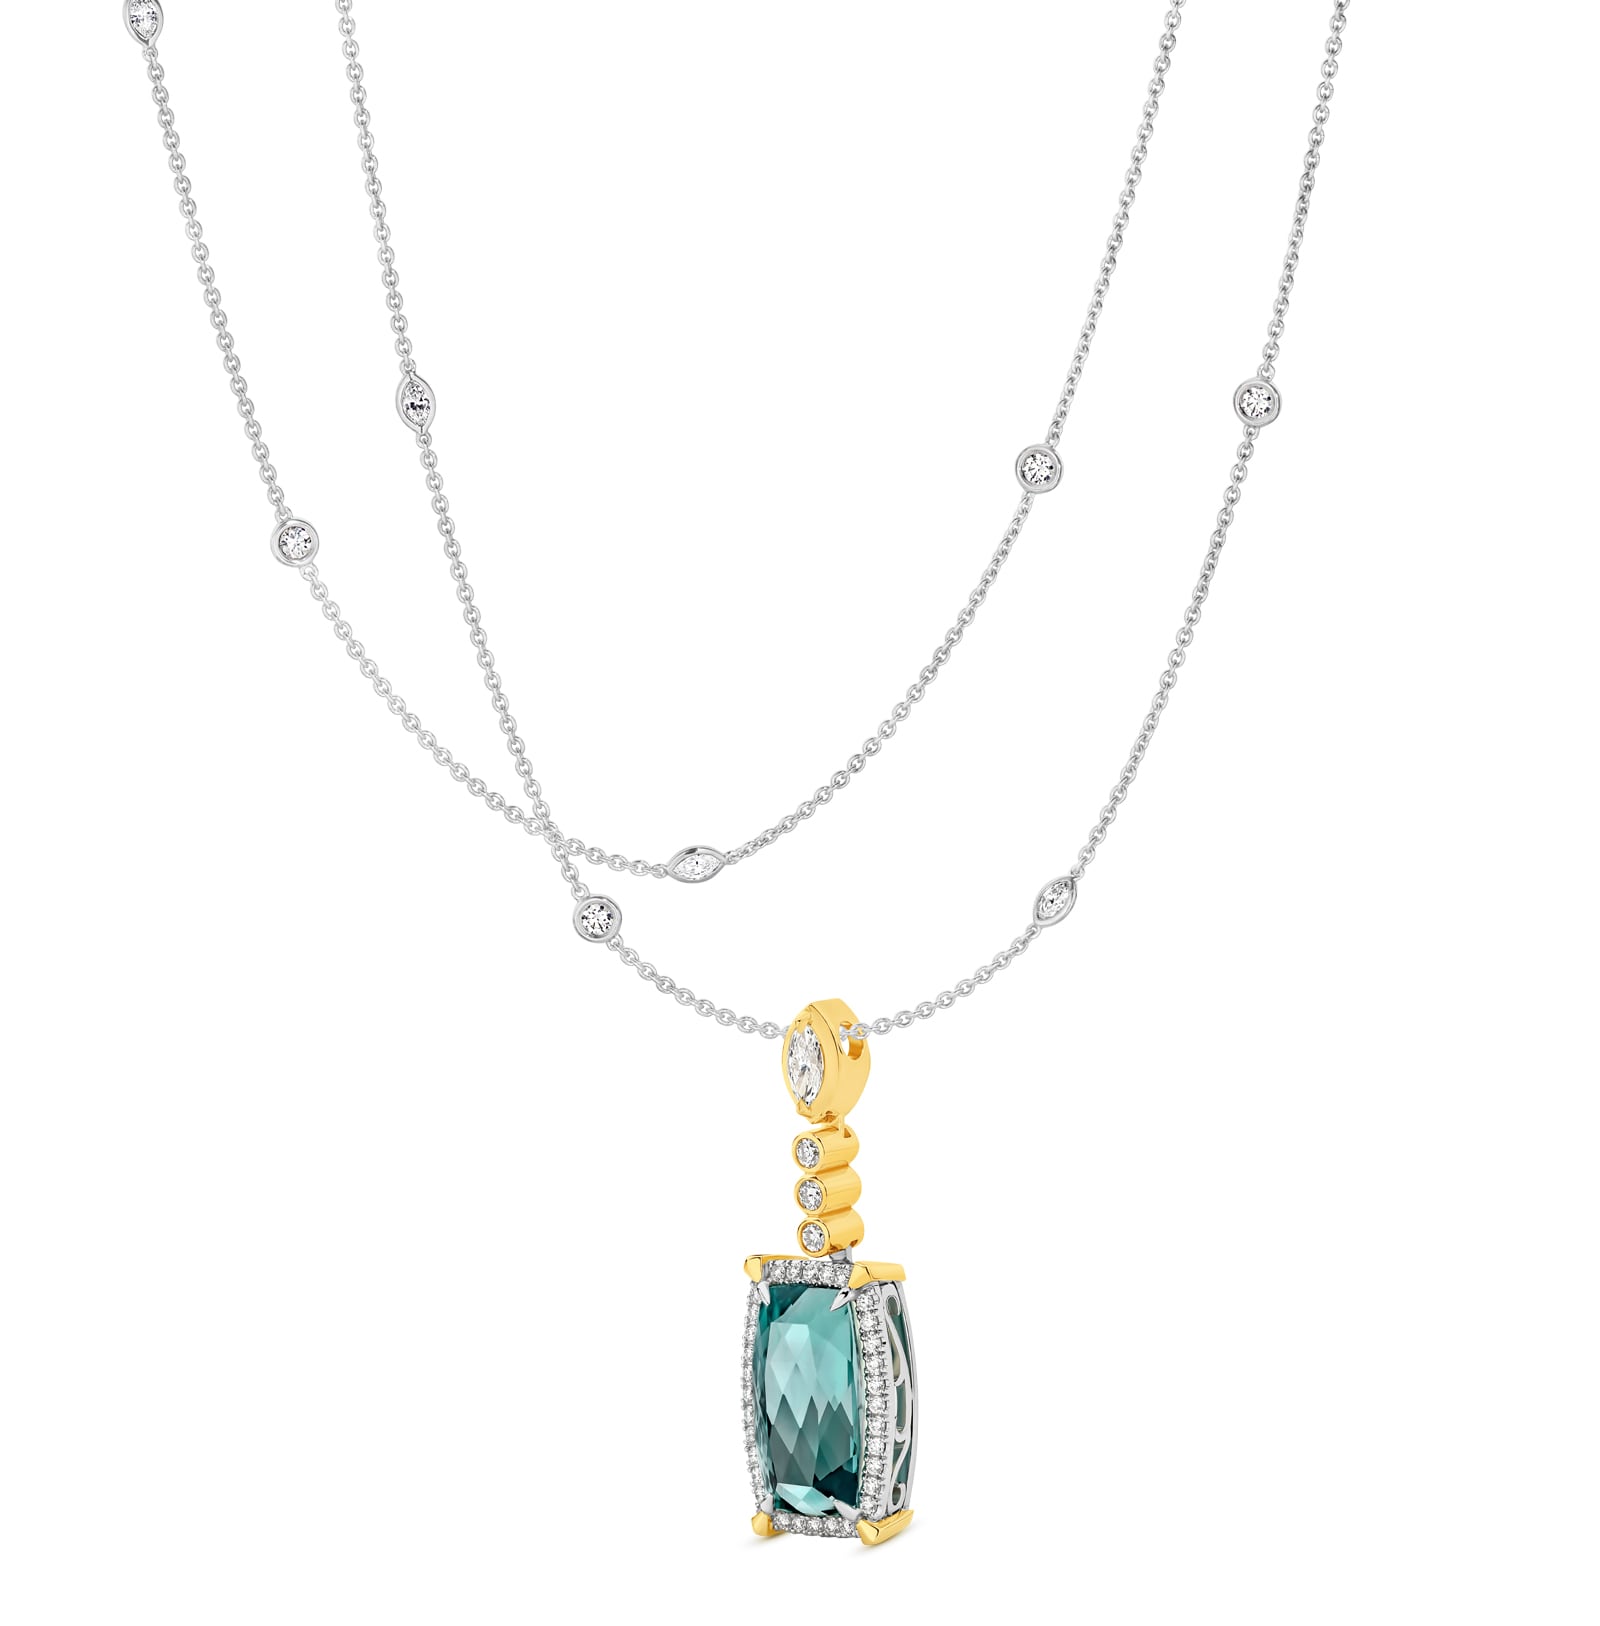 Keilana is a 7.23 carat cushion cut Mint Tourmaline and diamond pendant. She was designed and handcrafted by LeGassick's Master Jewellers, Gold Coast, Australia.